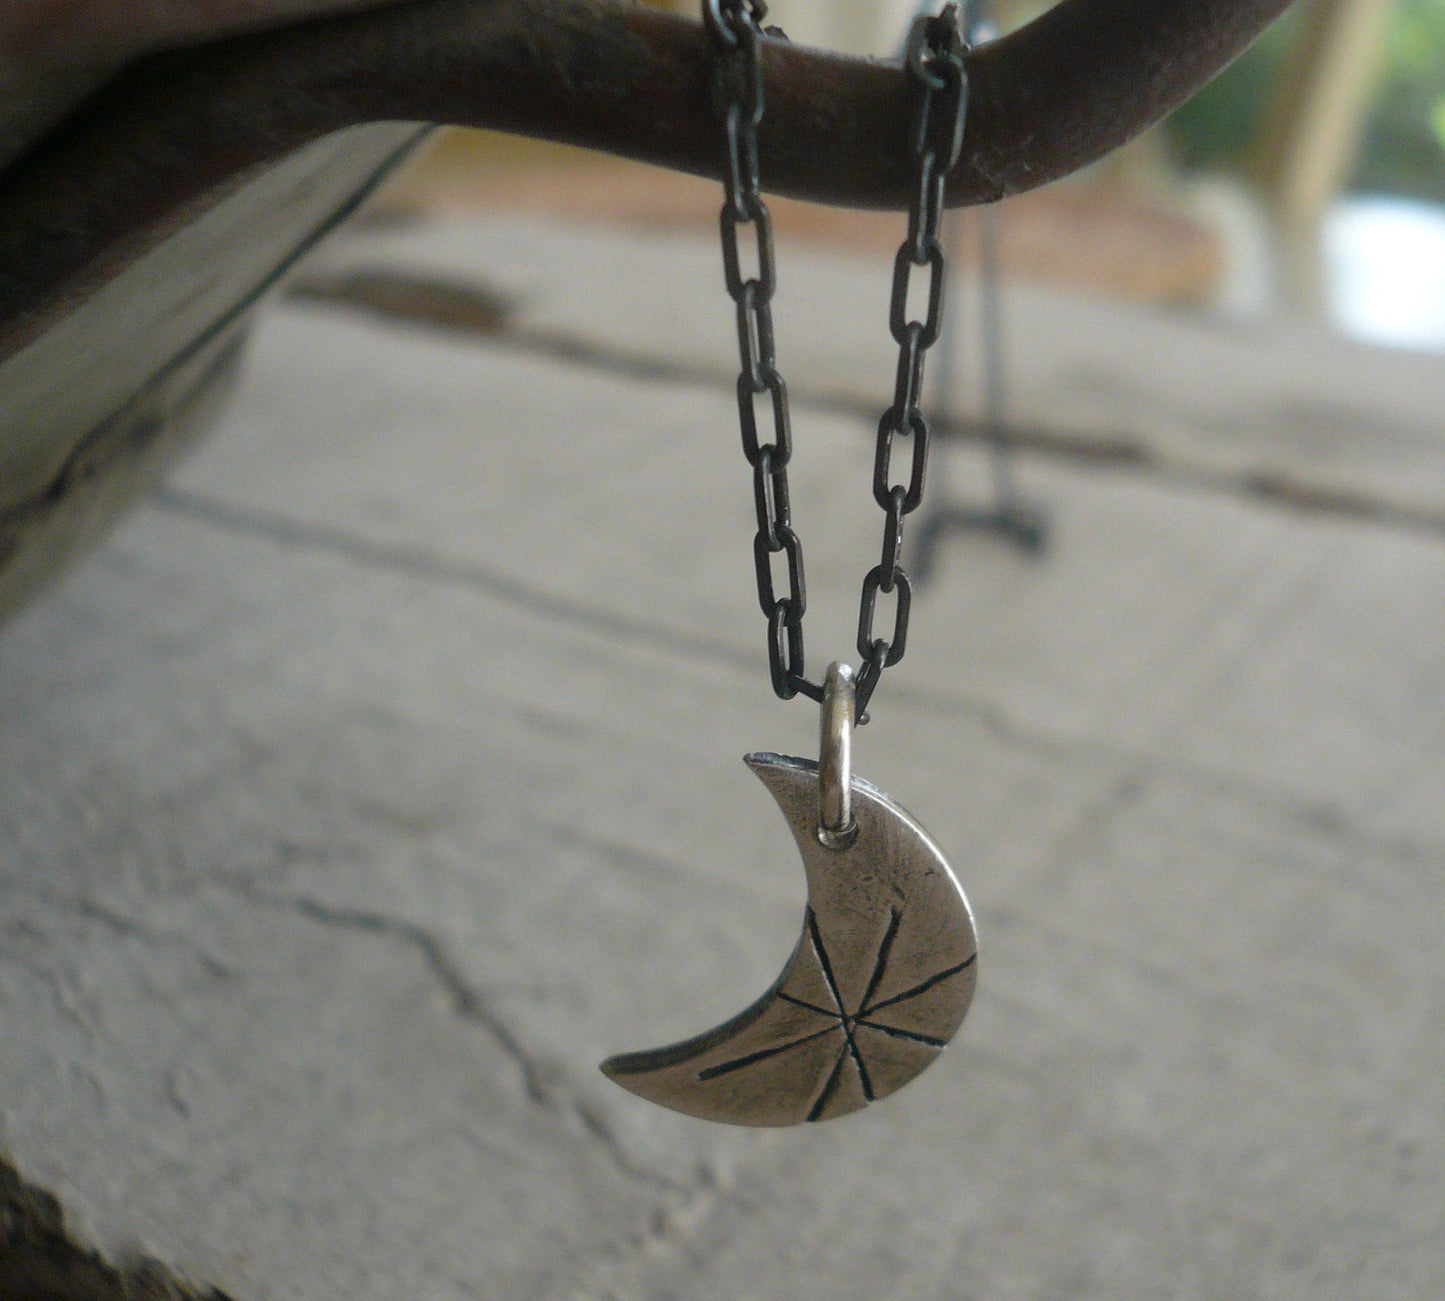 Luna Necklace - Handmade. Oxidized Fine and Sterling Silver